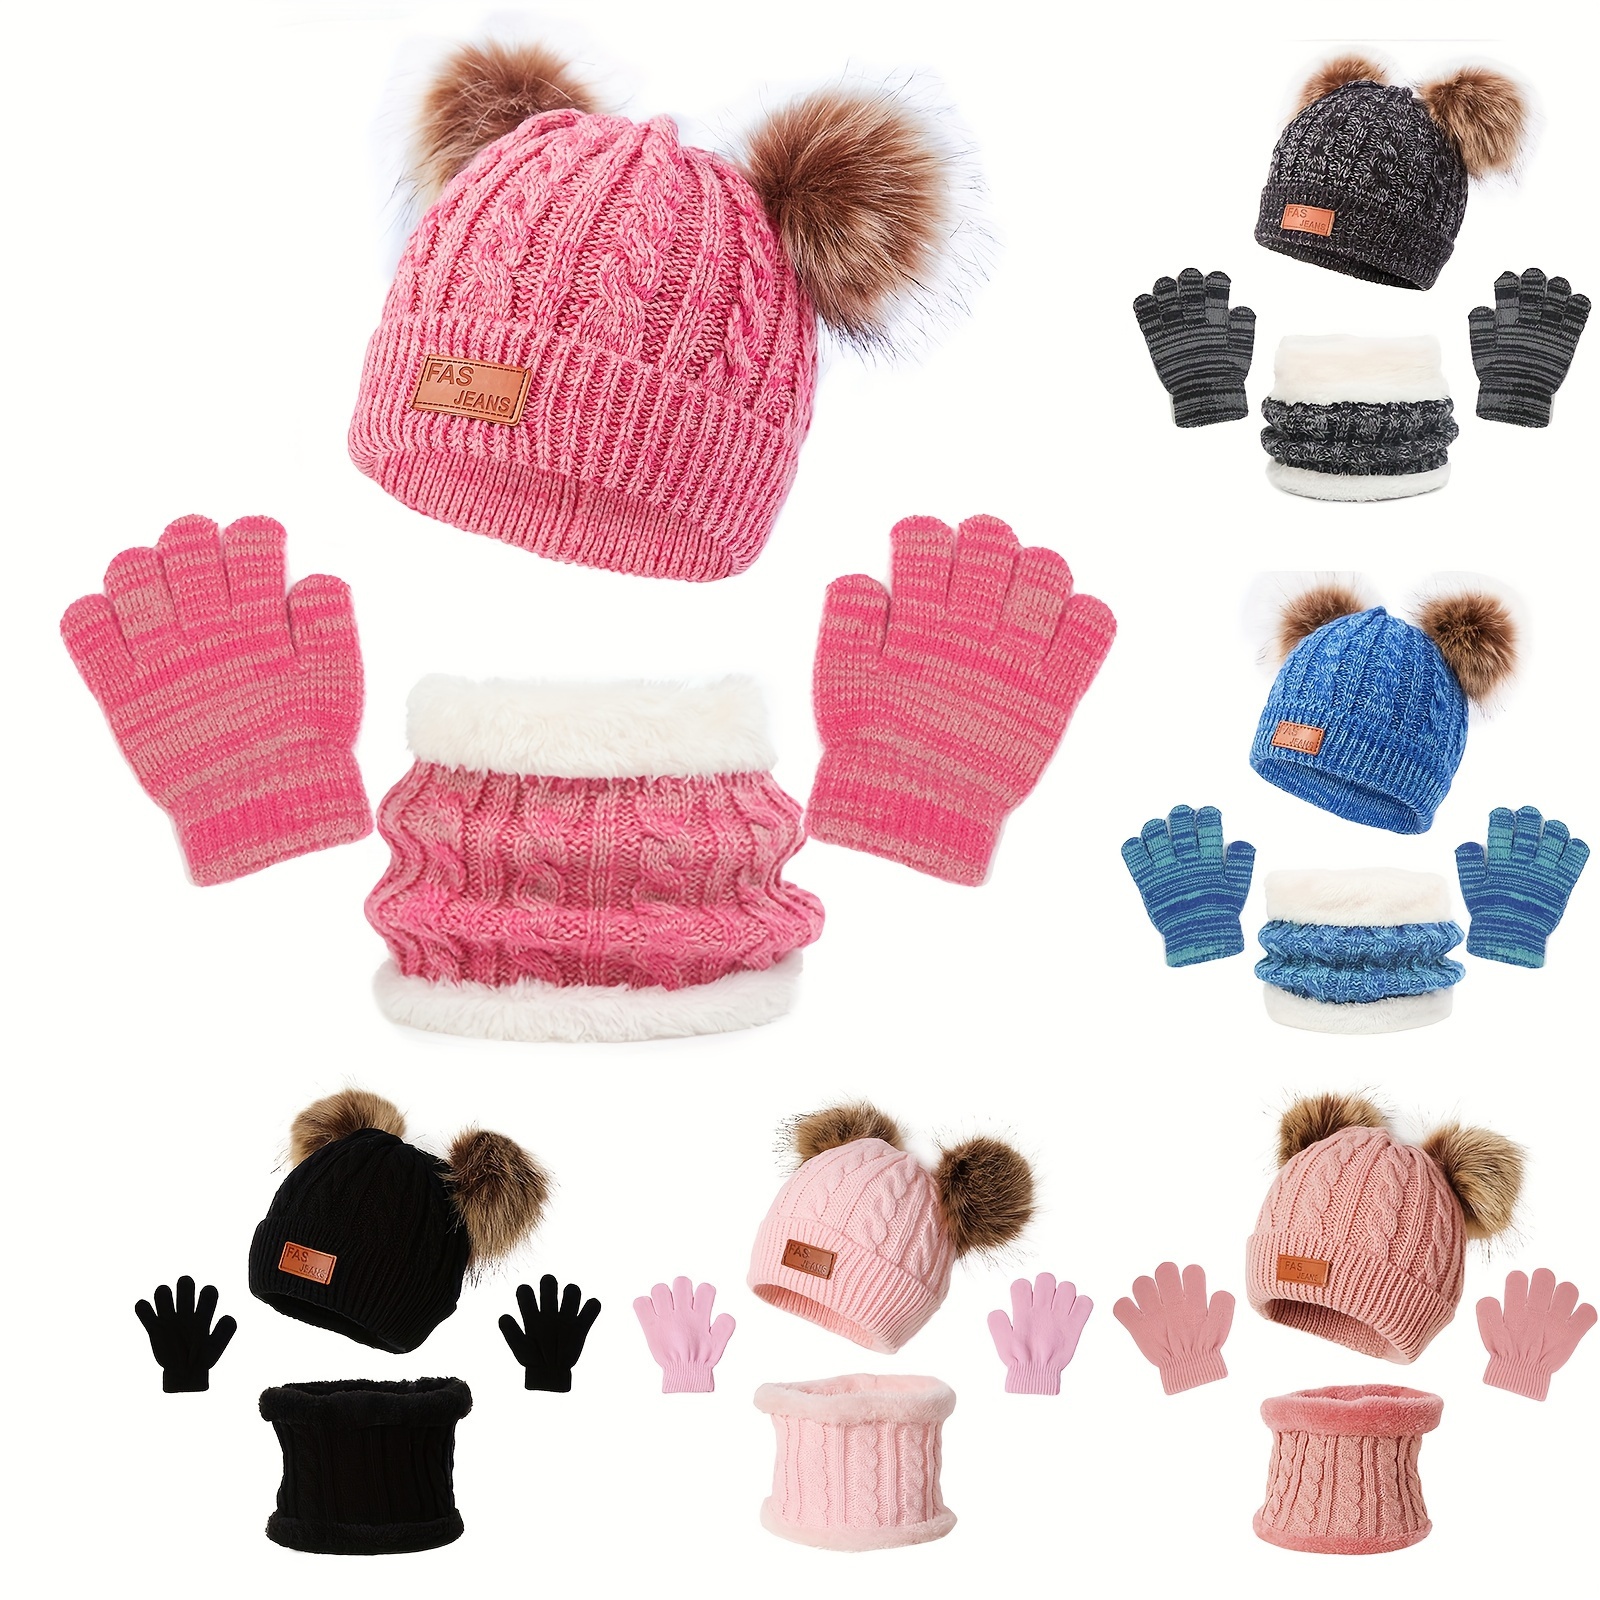 

Children's Winter Knitted Wool Lining Warm Hat, Scarf, Glove Set For 2-5 Year Old Boys And Girls